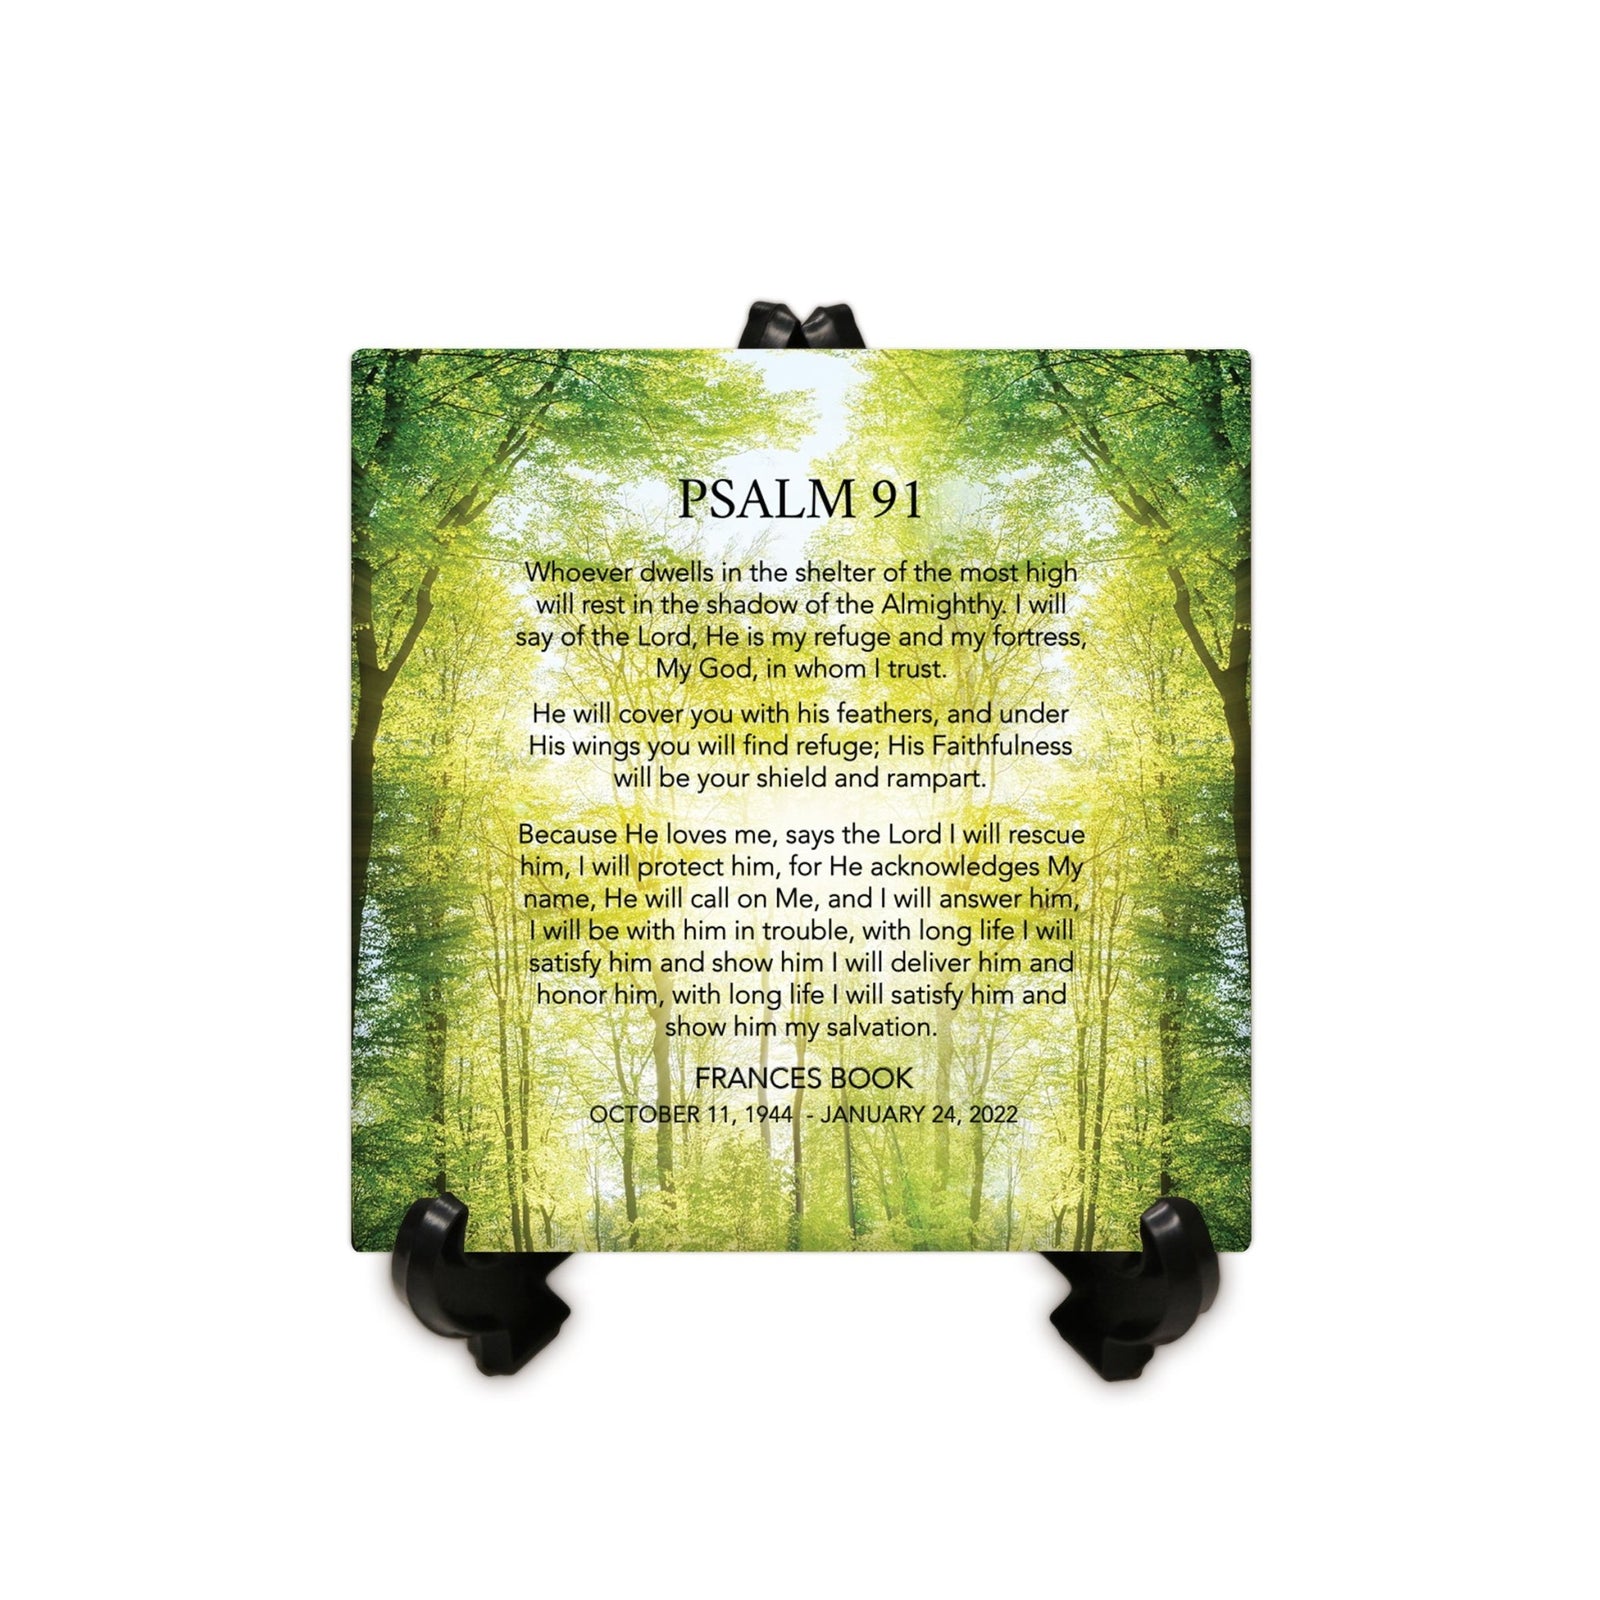 Personalized Memorial Ceramic Trivet with Stand for Home Decor - Psalm 91 - LifeSong Milestones